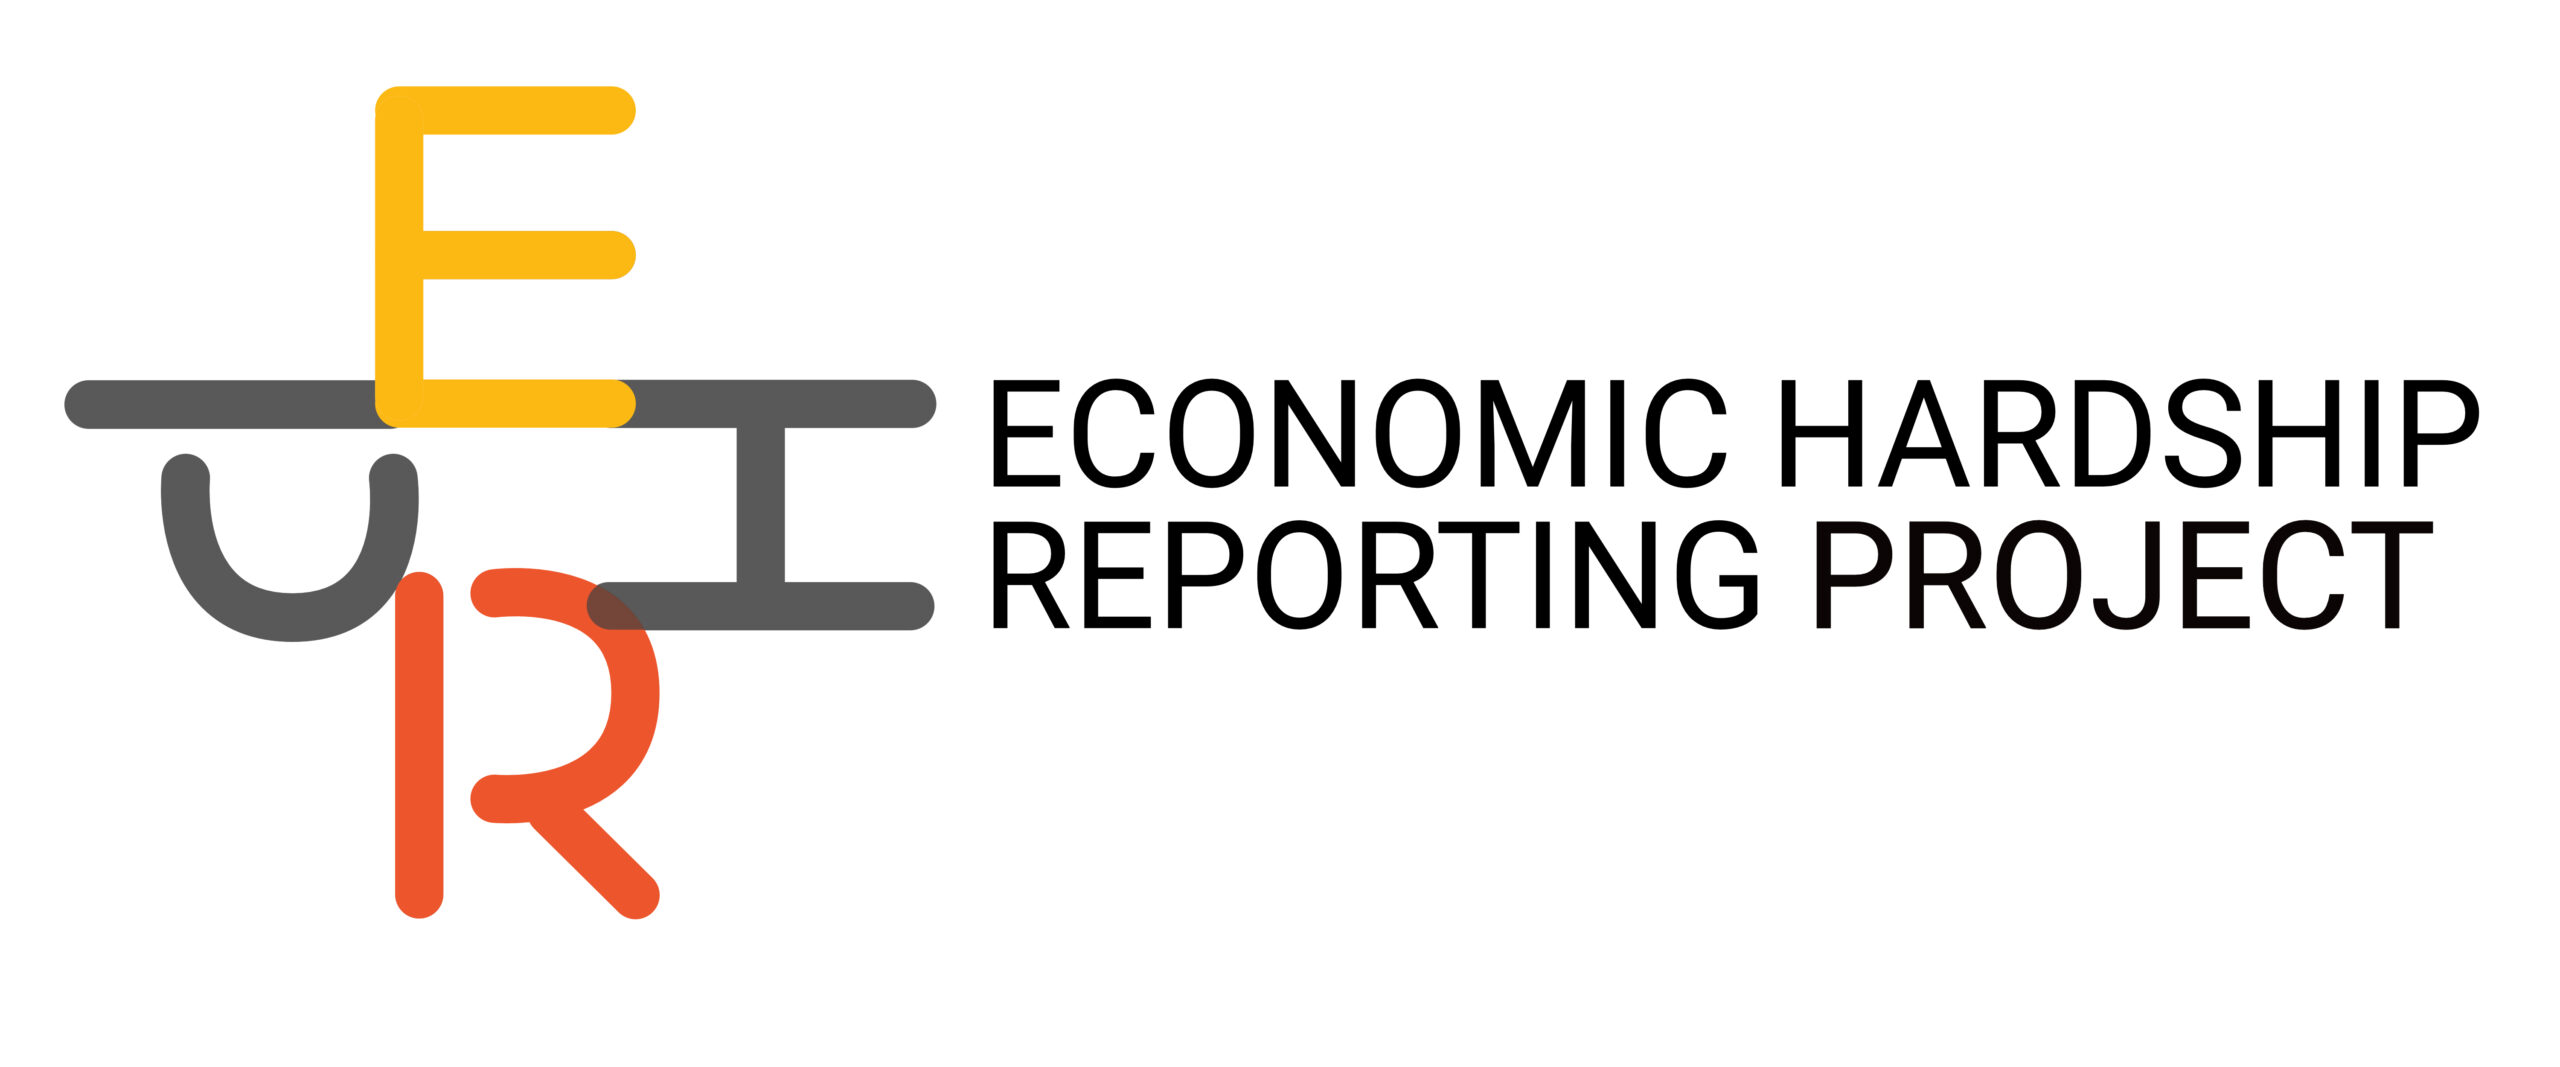 The Economic Hardship Reporting Project (EHRP)